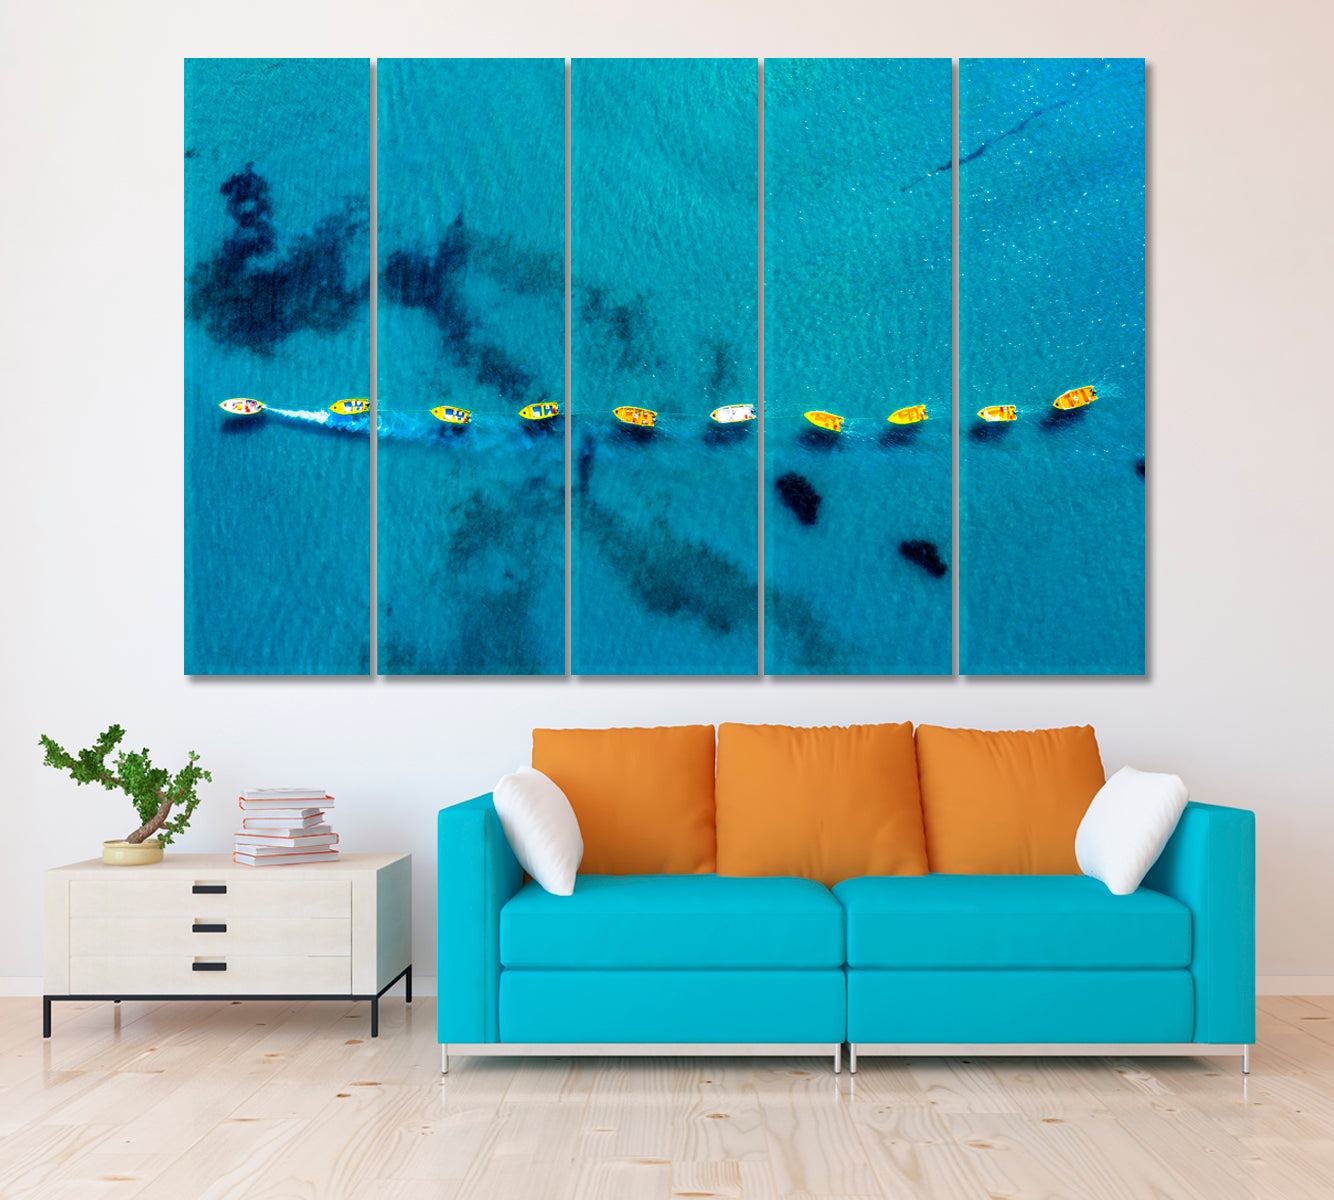 Boats in Turquoise Ocean Canvas Print ArtLexy 5 Panels 36"x24" inches 